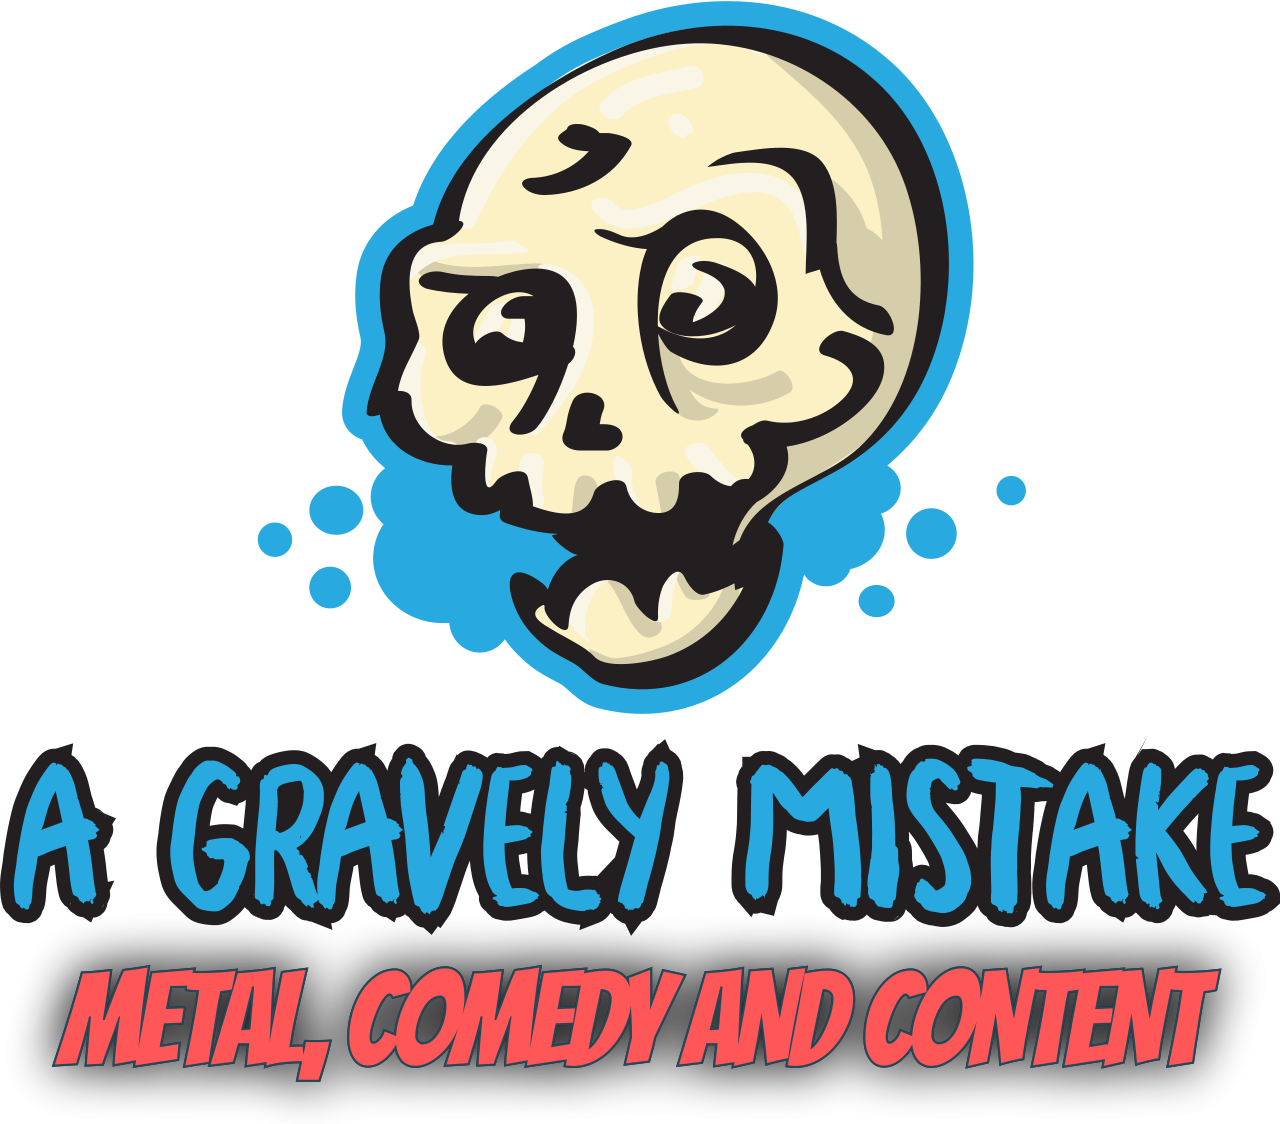 A Gravely Mistake's logo